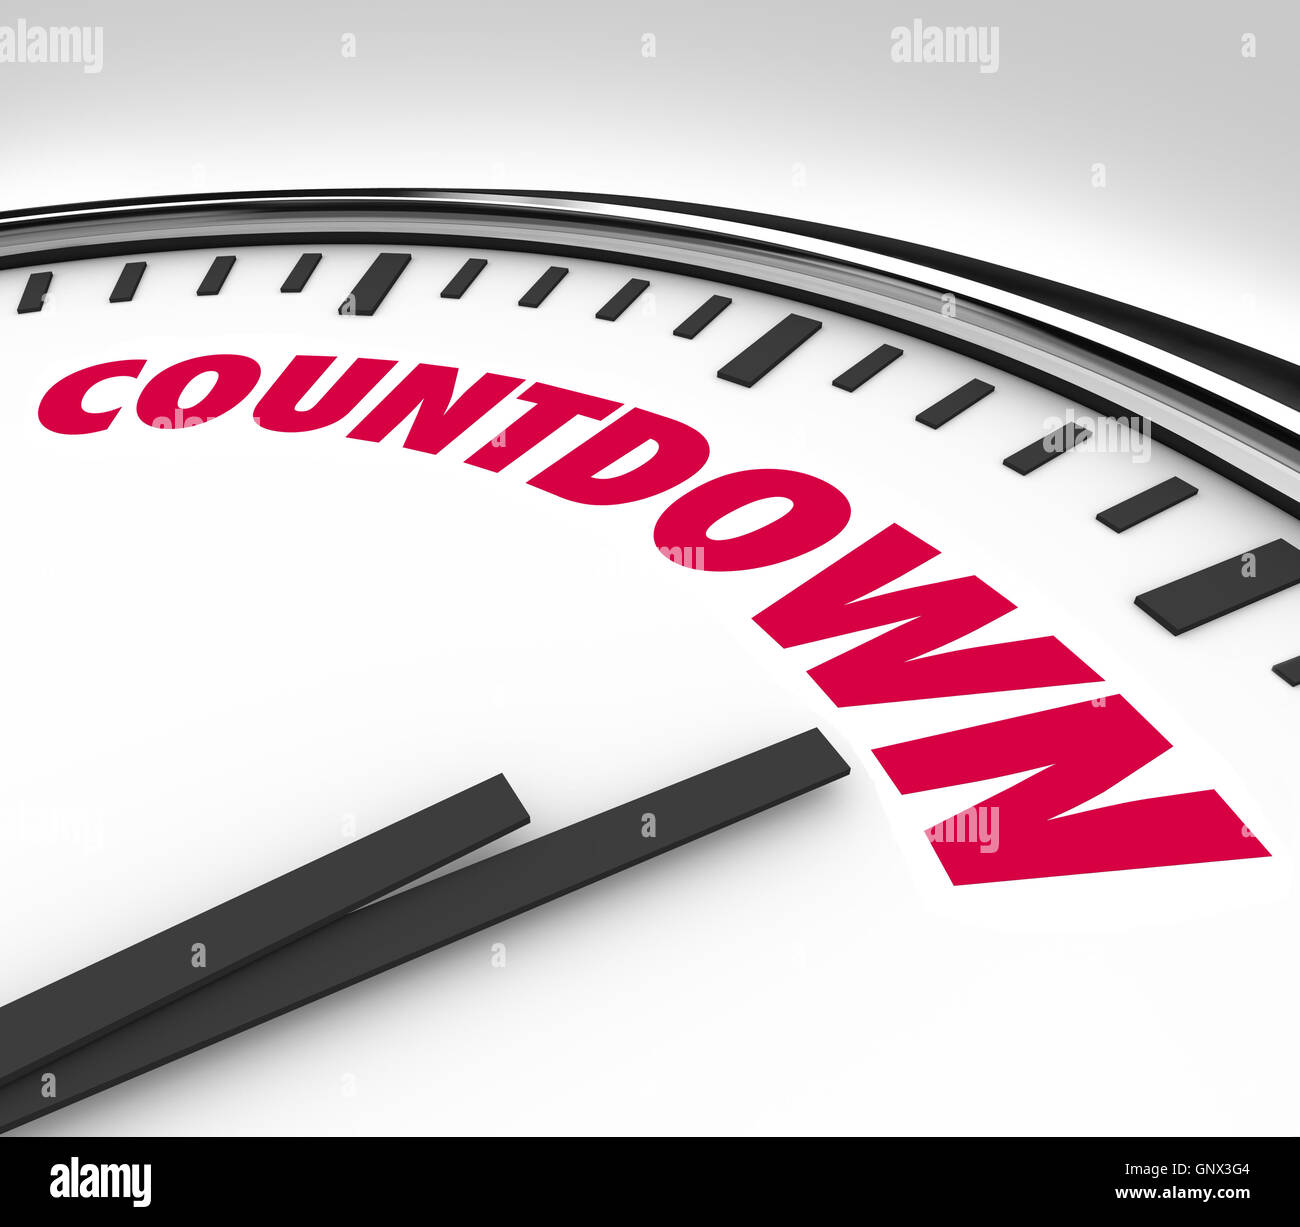 Countdown Clock Counting Down Final Hours and Minutes Stock Photo